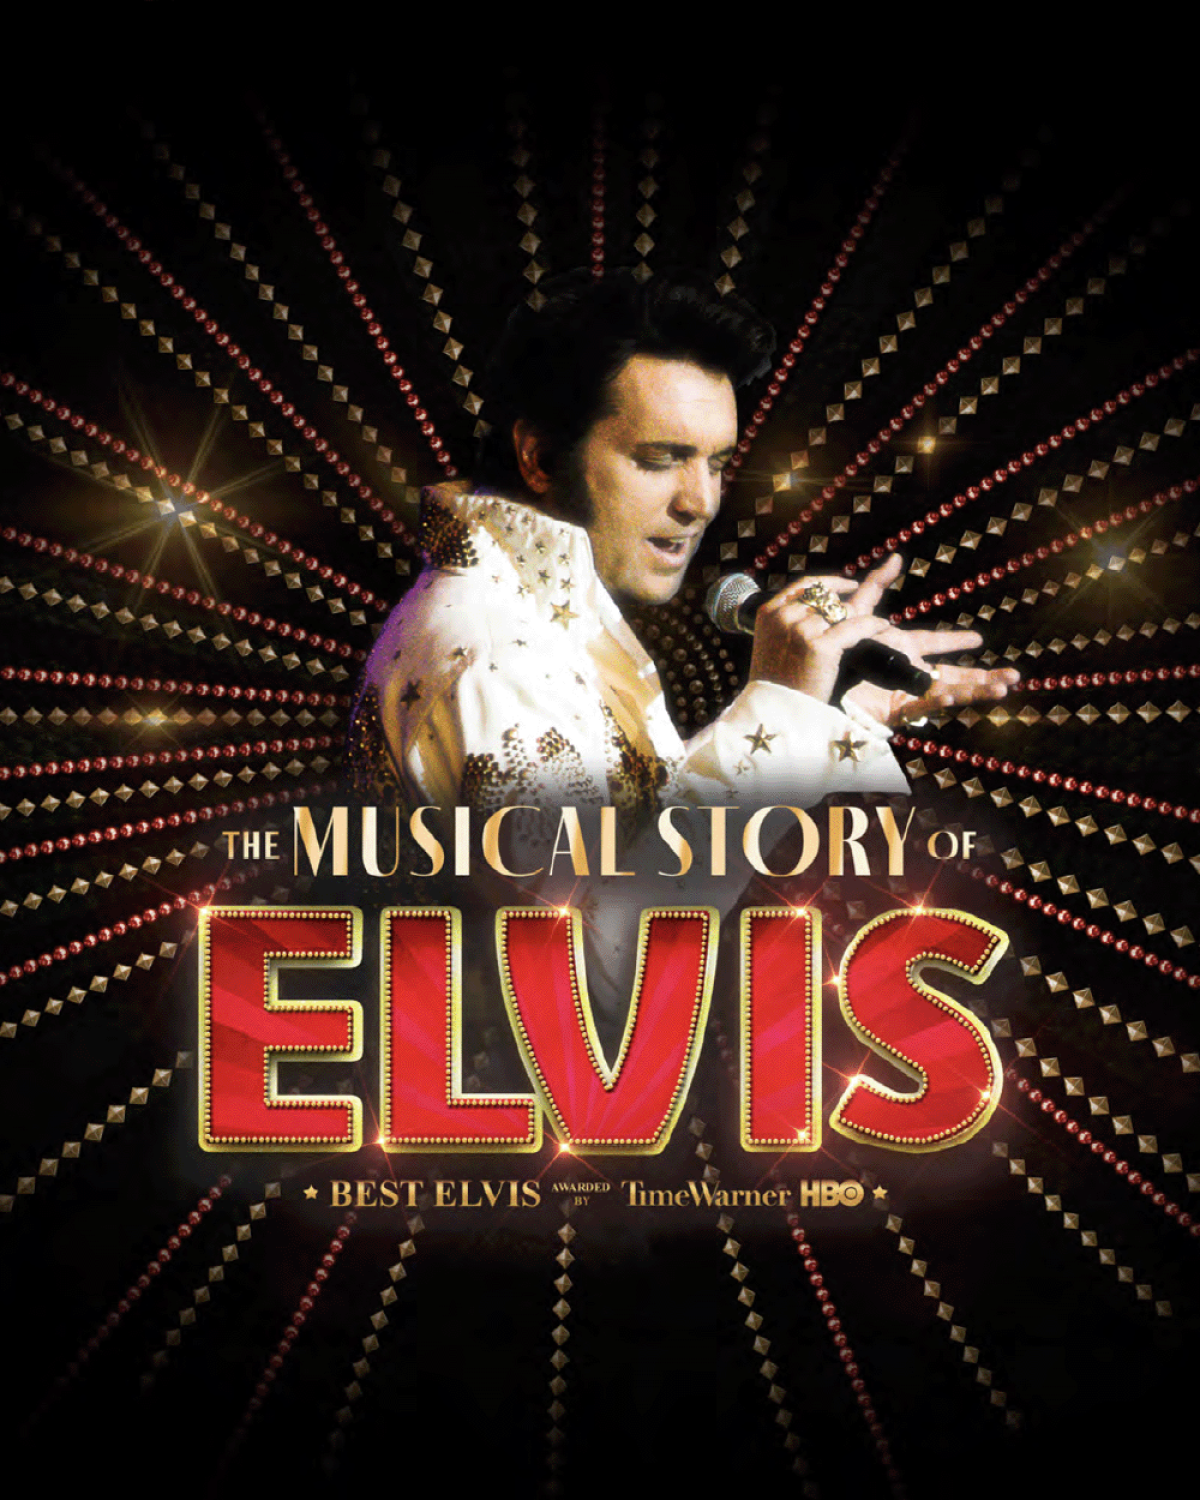 The Musical Story Of Elvis at Olympia Tickets